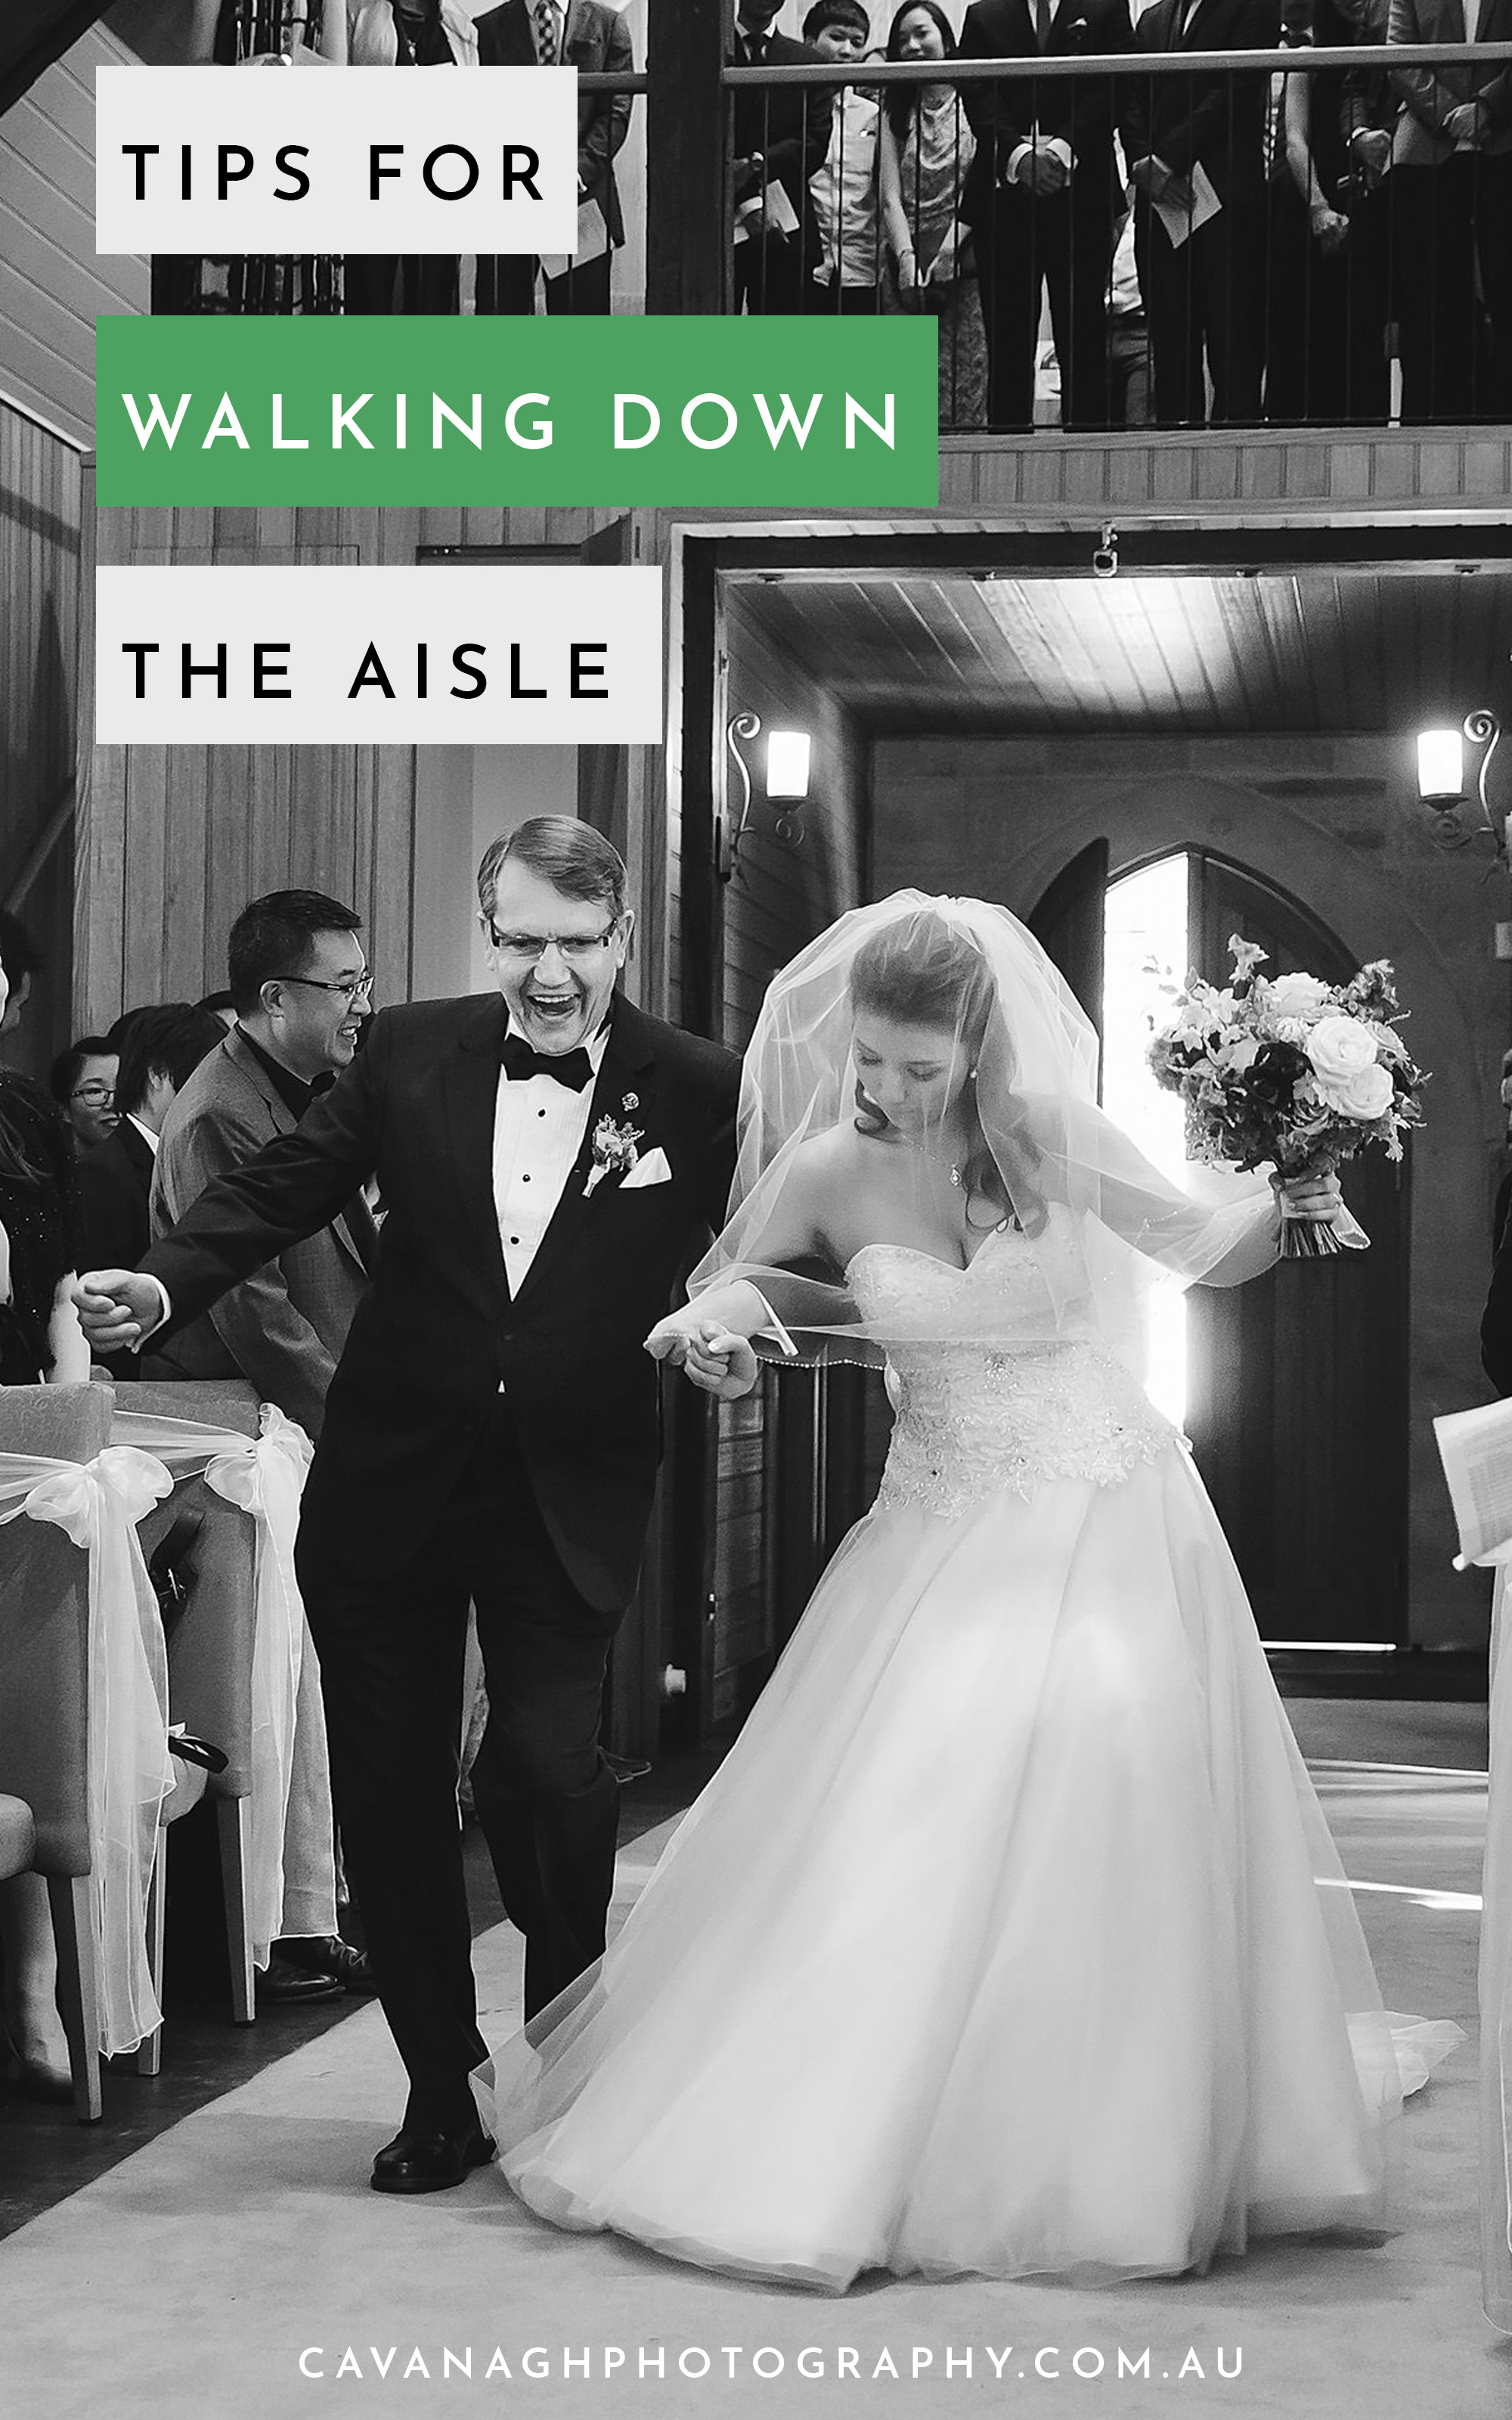 tips for walking down the aisle